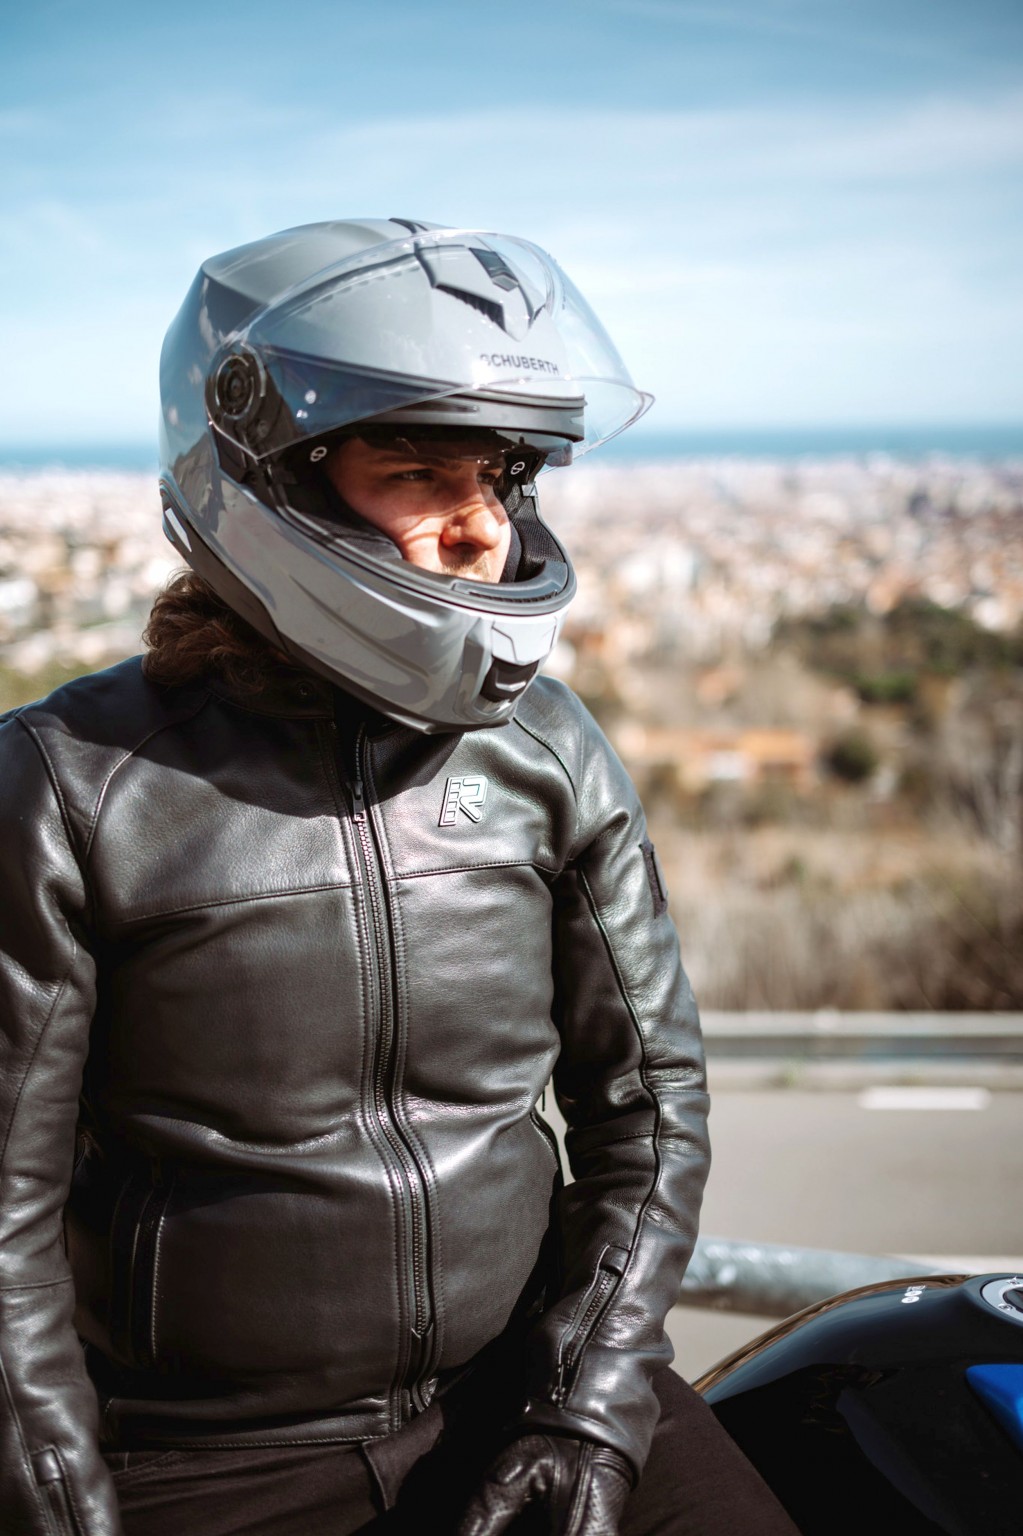 Schuberth S3 sport touring helmet in the test - Image 20